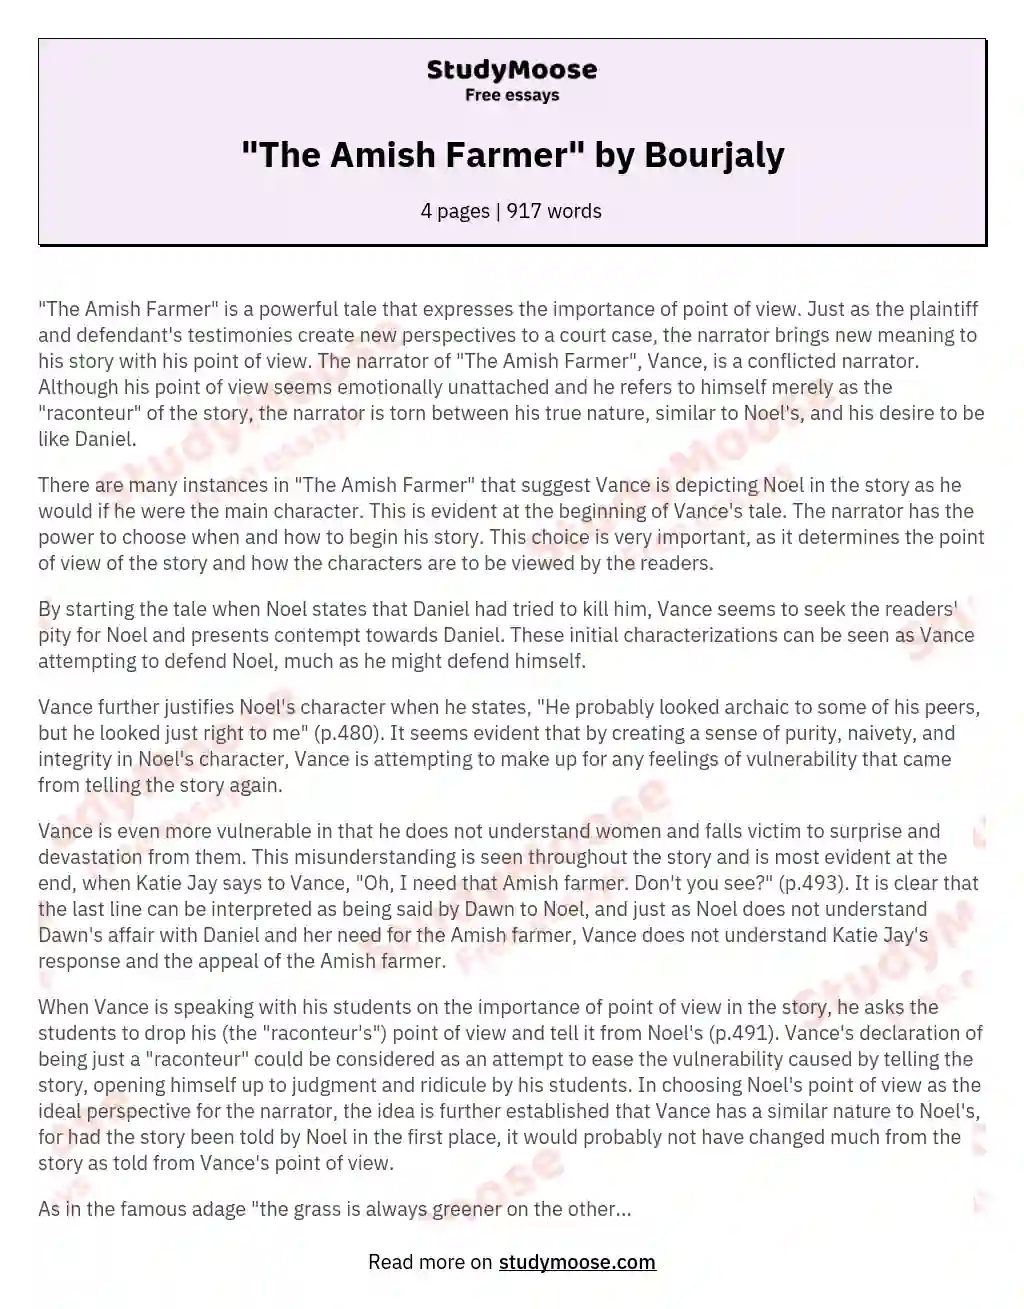 "The Amish Farmer" by Bourjaly essay